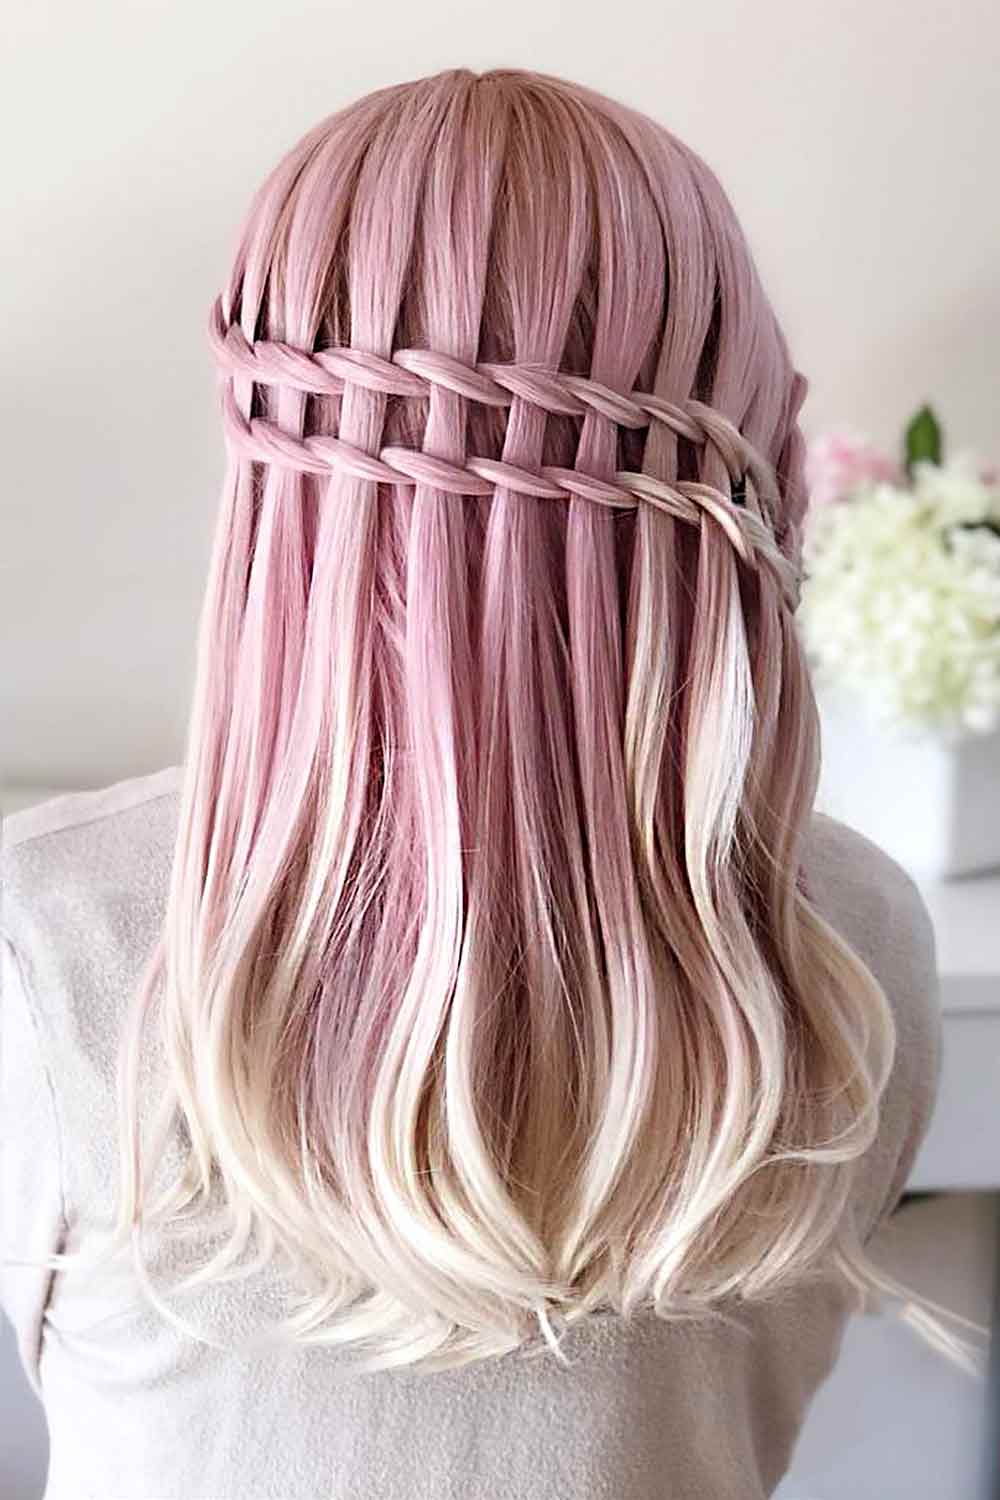 Waterfall Braids For Girls #fallhairstylestrends #hairstylestrends #trends